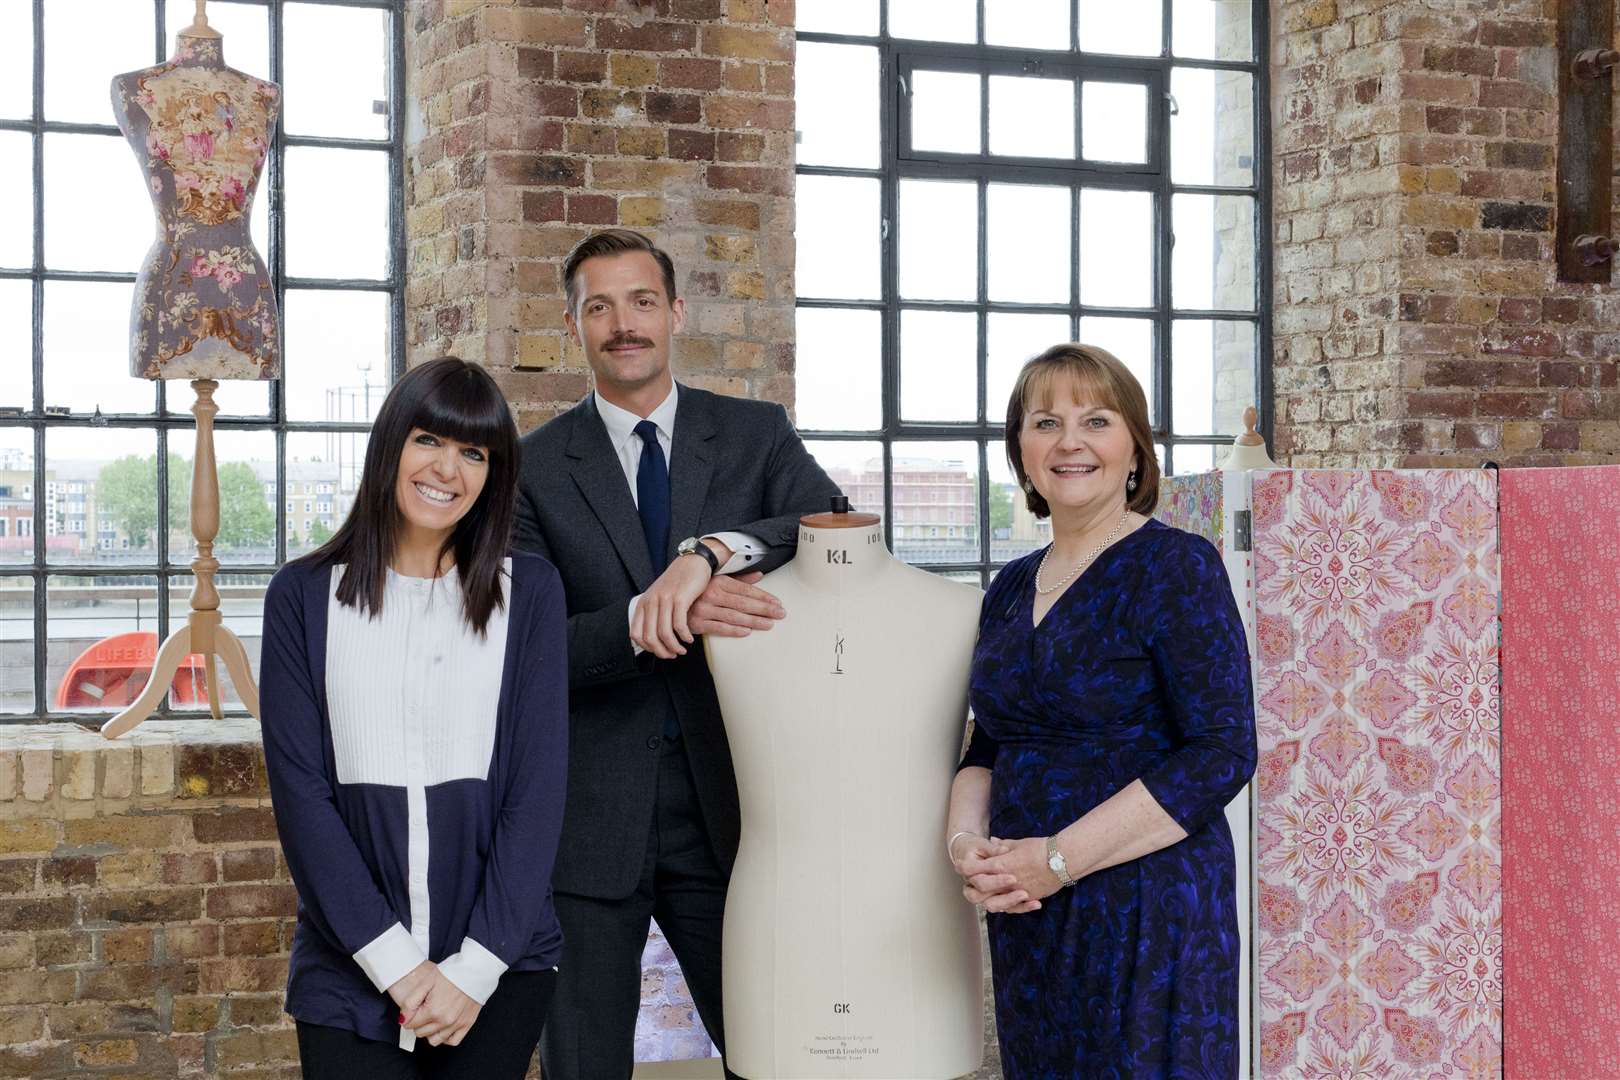 Has hit BBC show The Great British Sewing Bee inspired people to try and make do and mend? Image credit: BBC.